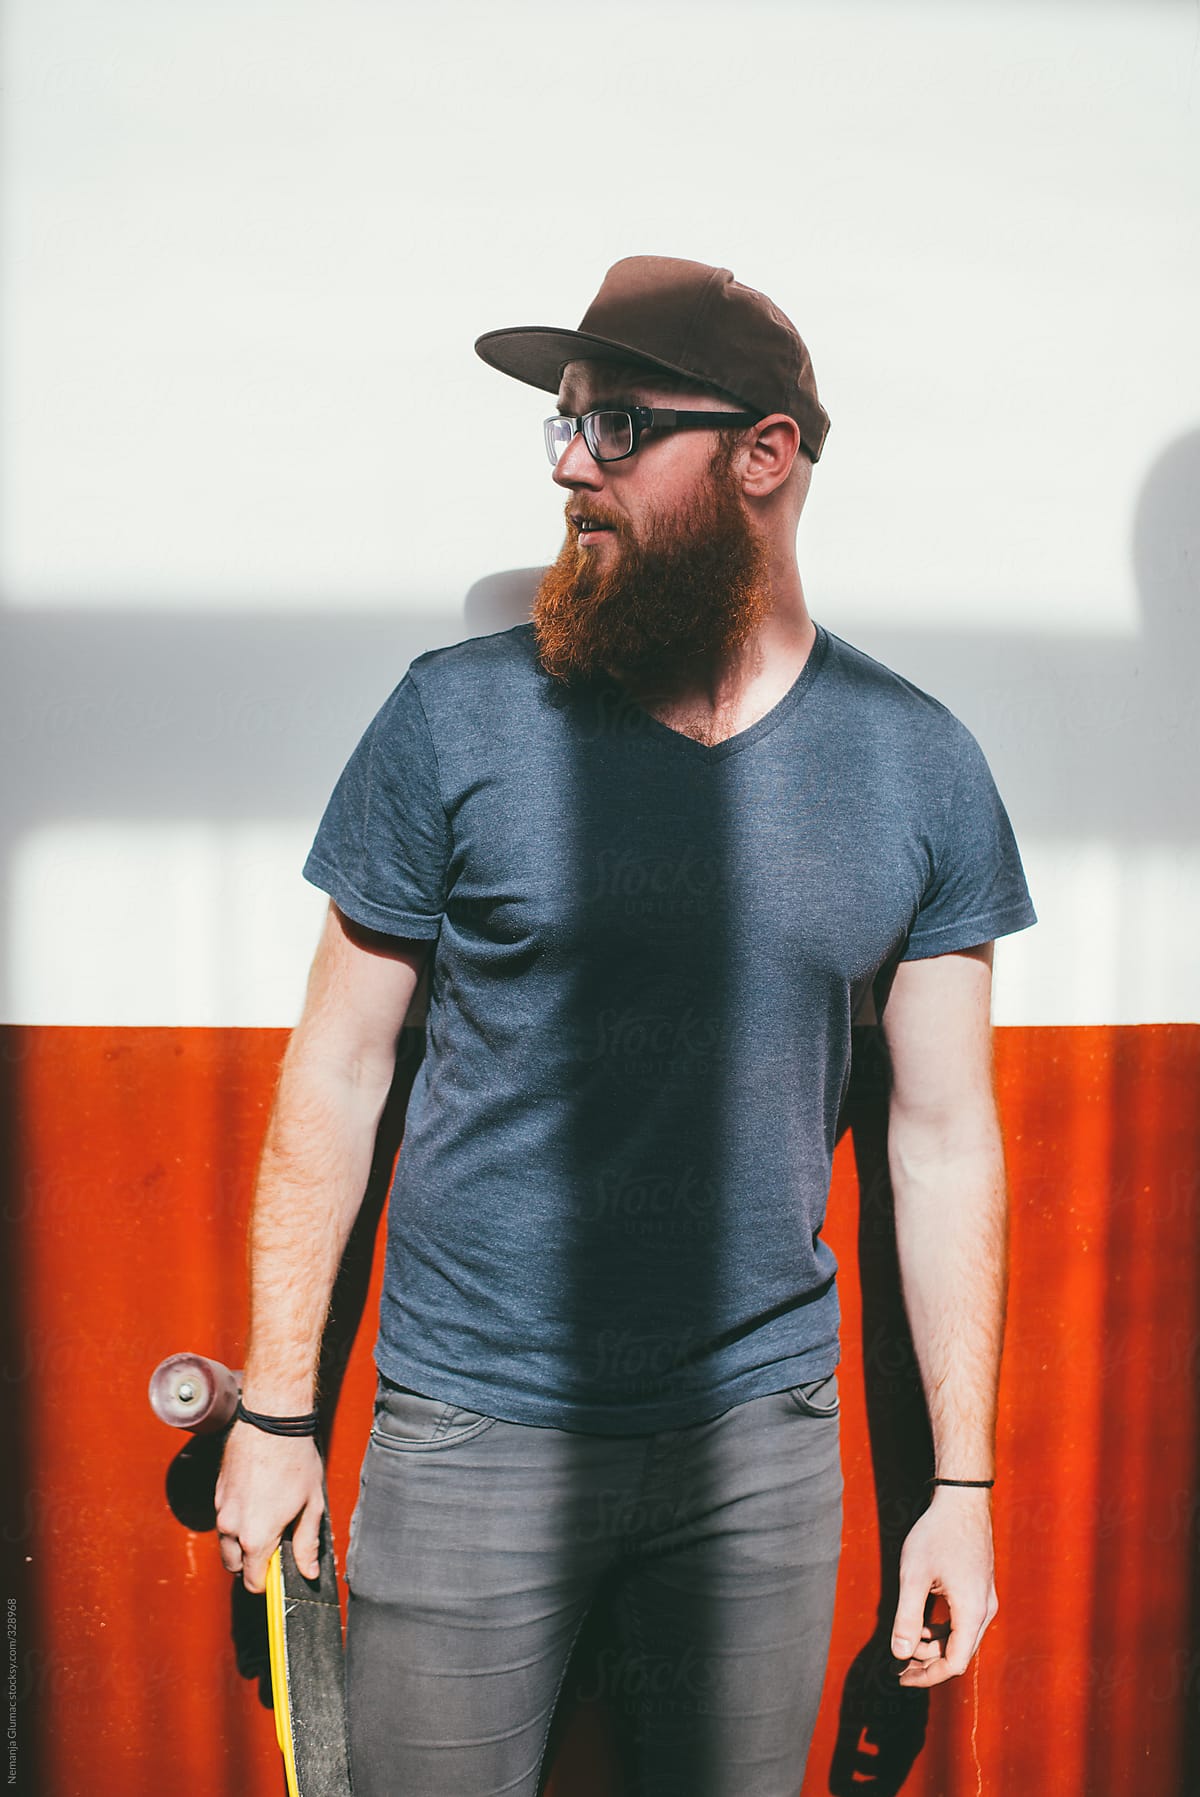 Young Alternative Skater With Red Beard